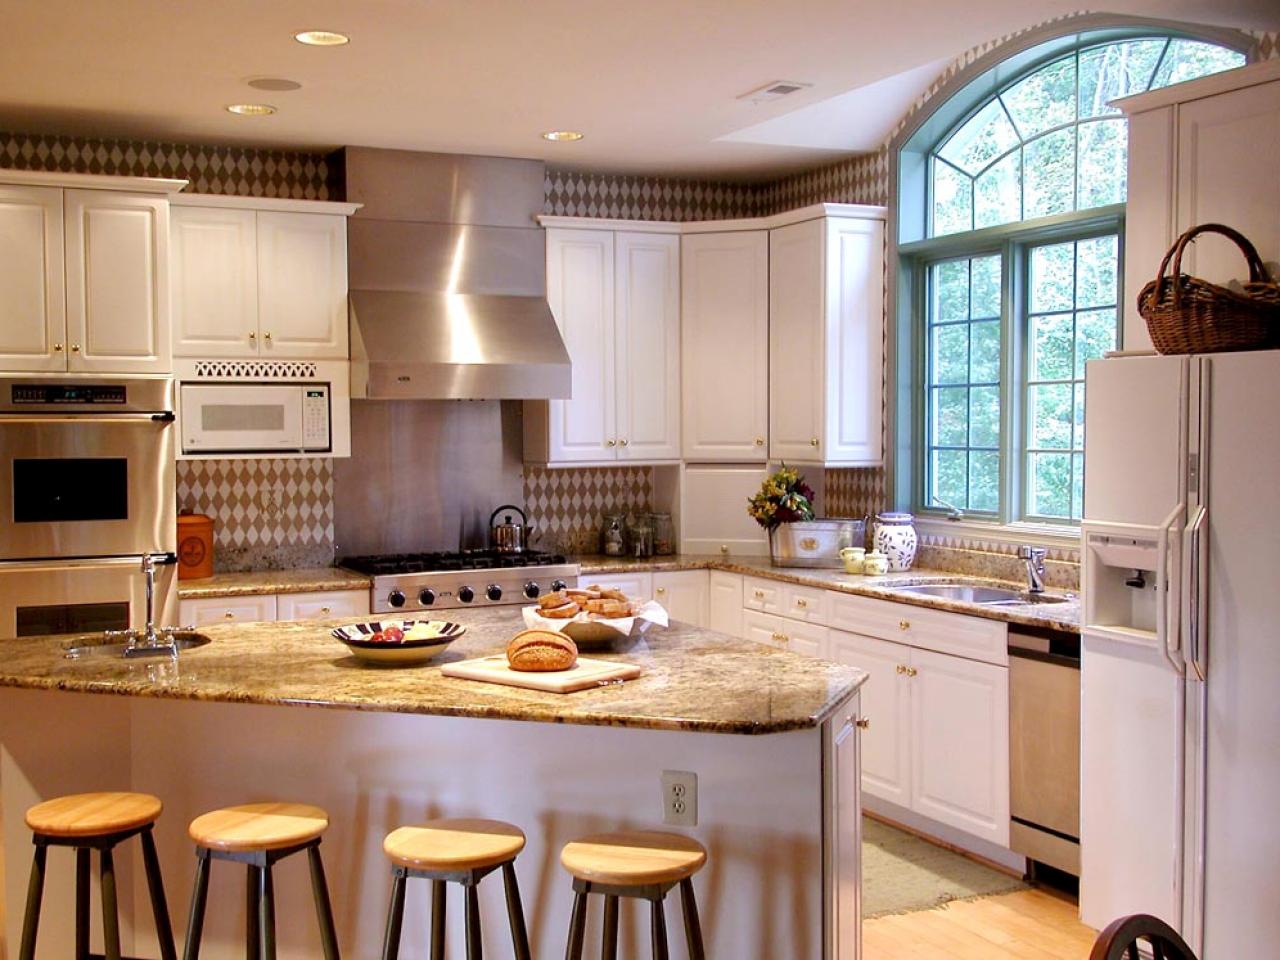 Transitional Kitchen Design How To Create A Transitional Kitchen Hgtv Traditional kitchen cabinet styles include a variety of historic designs from european and american architecture over the past three centuries. transitional kitchen design how to